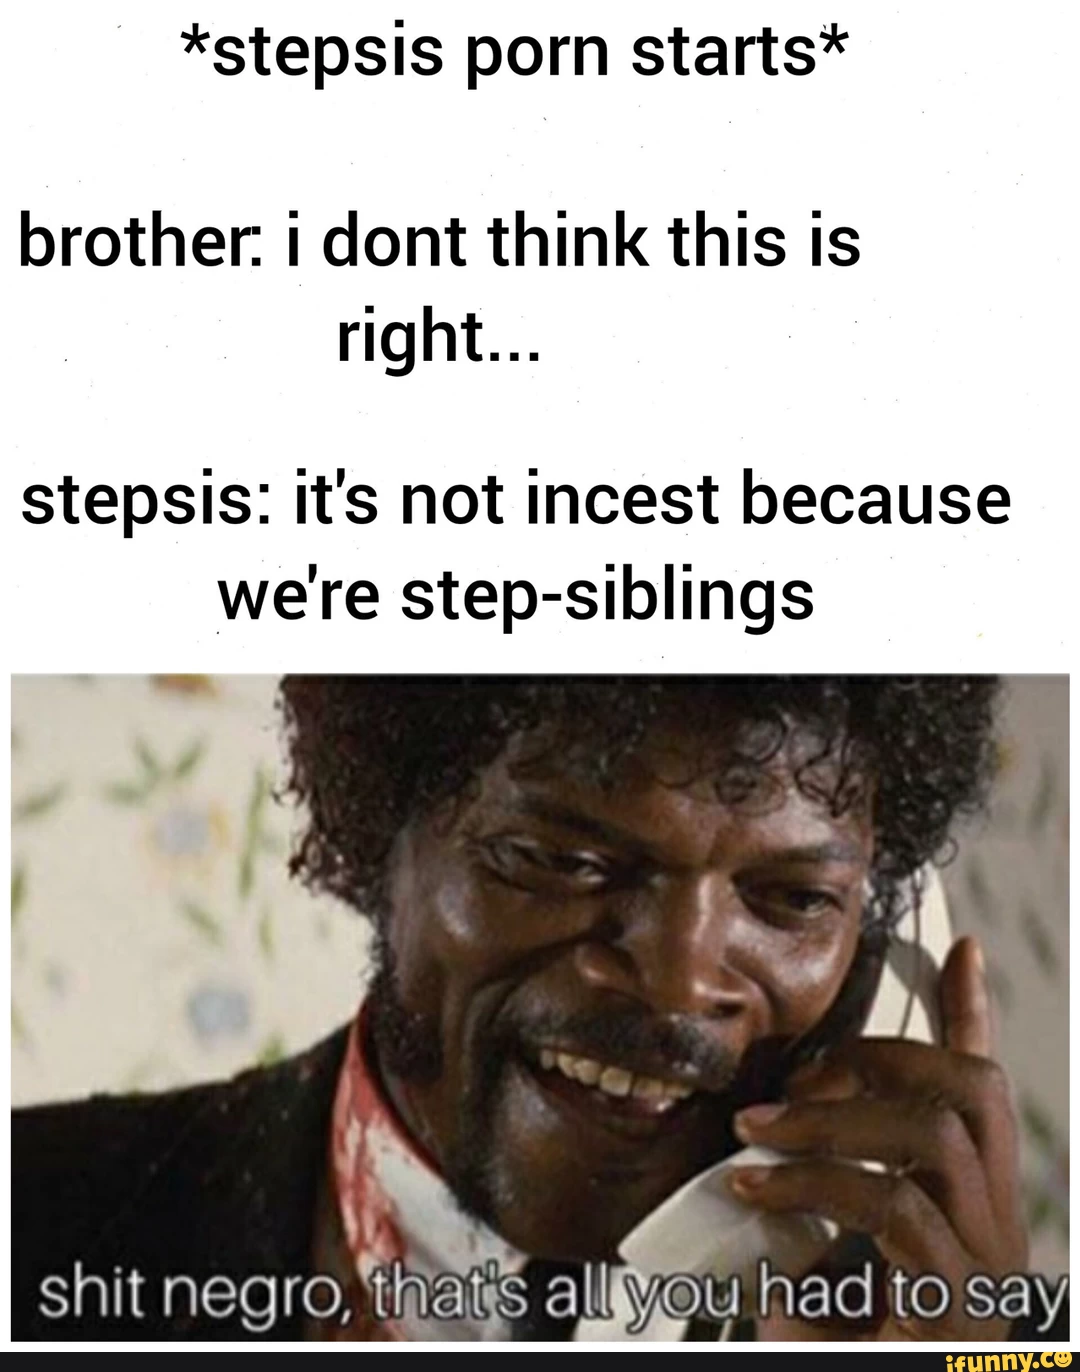 *stepsis porn starts* brother: i dont think this is right...
</p>
	</div><!--/.blog-post-entry.markup-format-->
	<ul class=